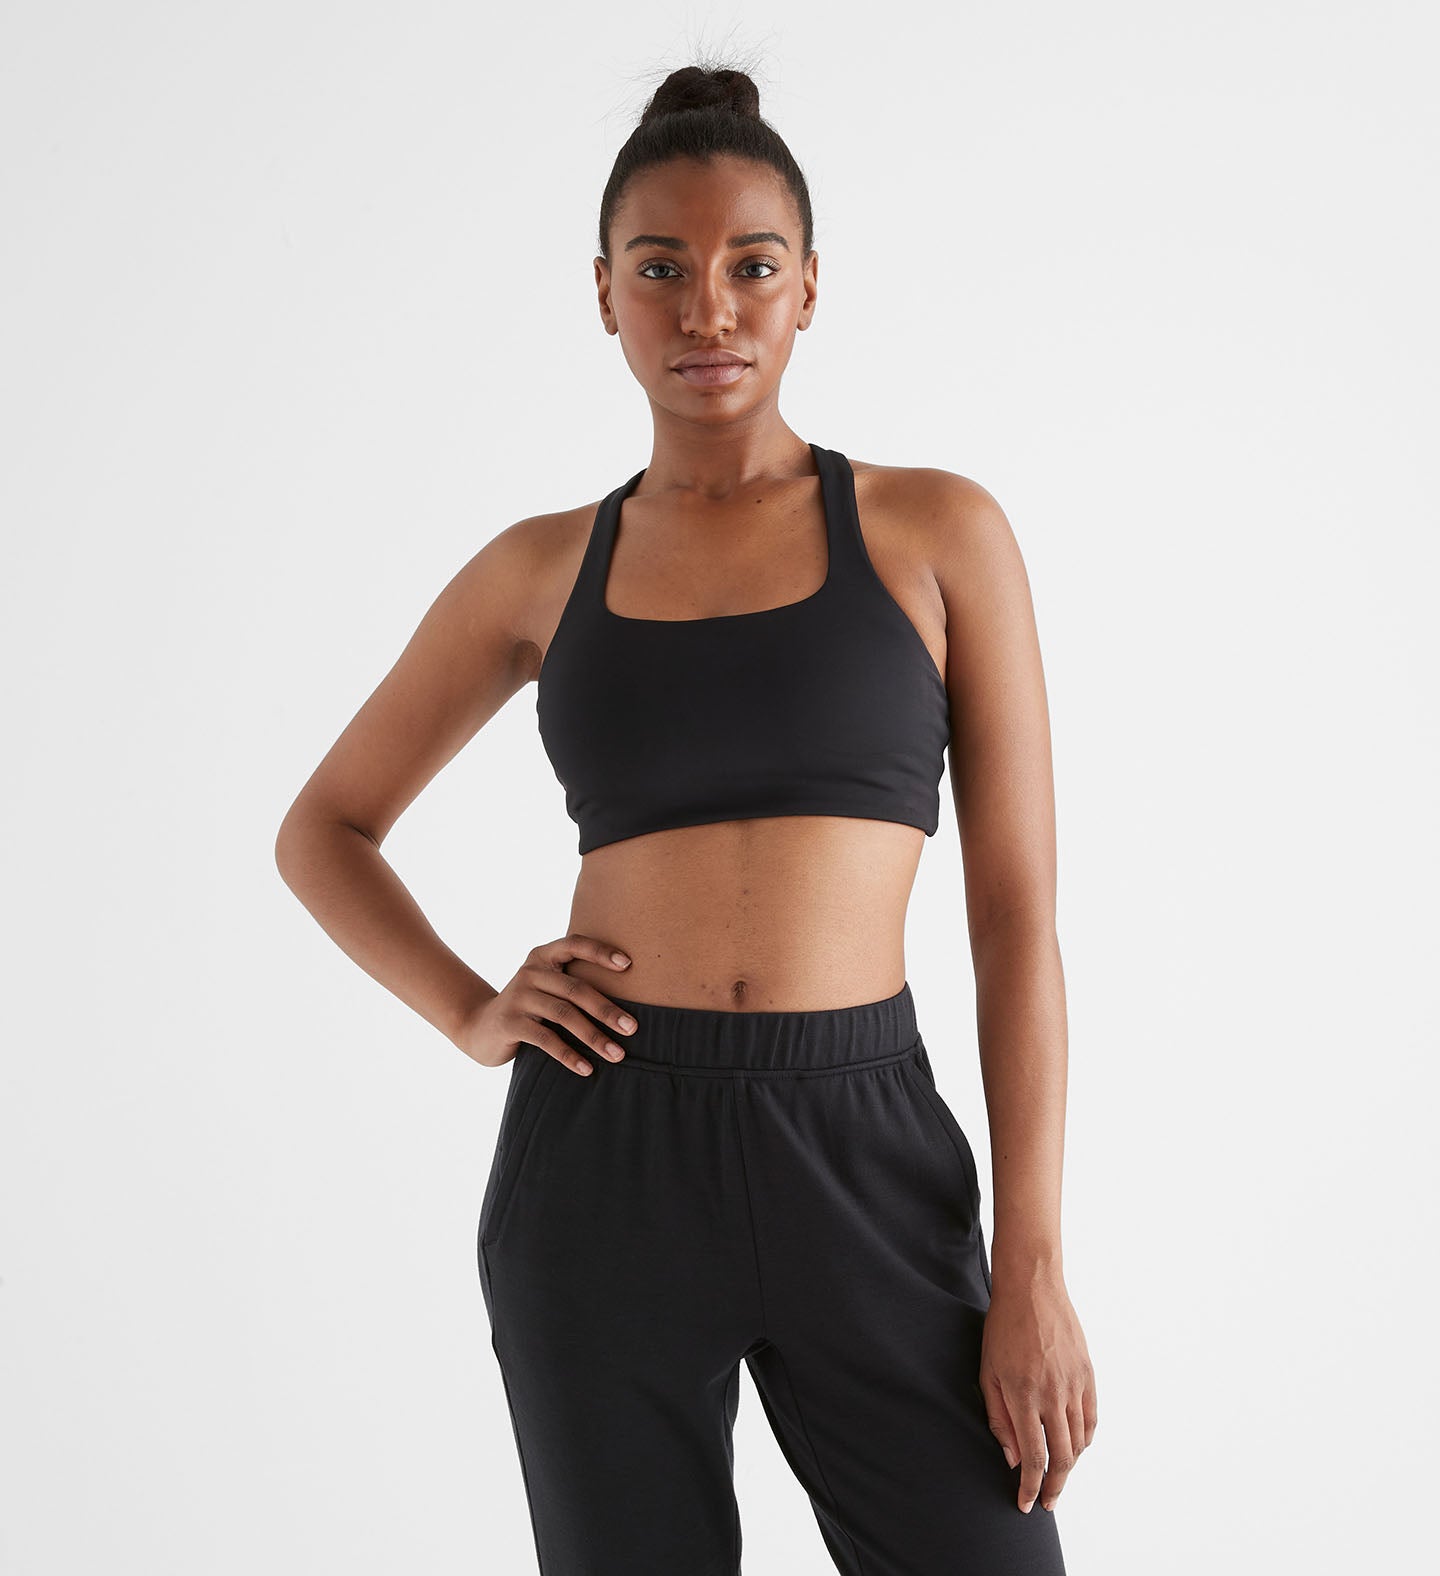 Which sports bra best suits your lifestyle?